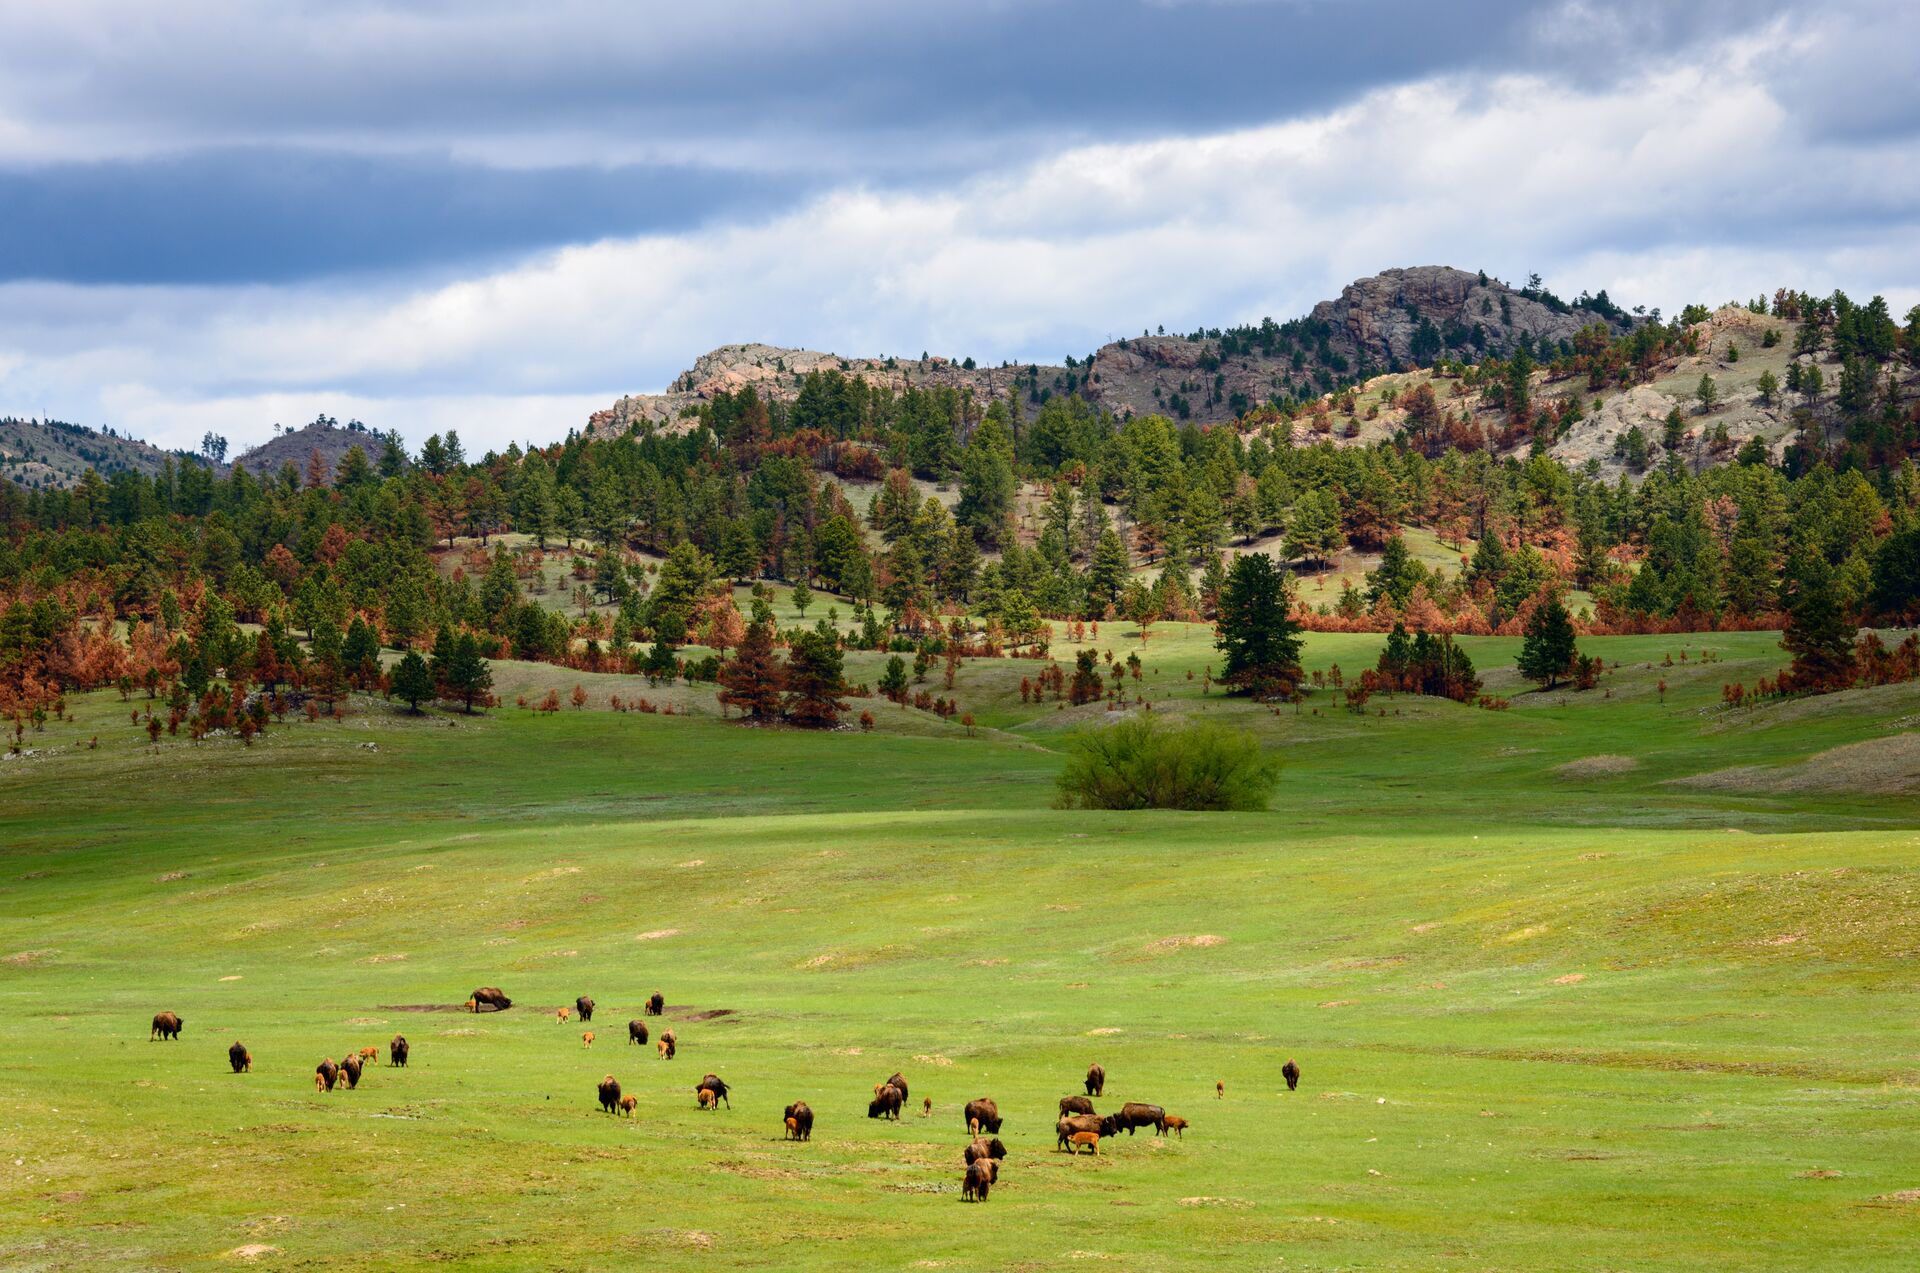 Image of bison grazing the lush green fields of the Balck Hills , South Dakota. With mountains in the background and a bright sky.